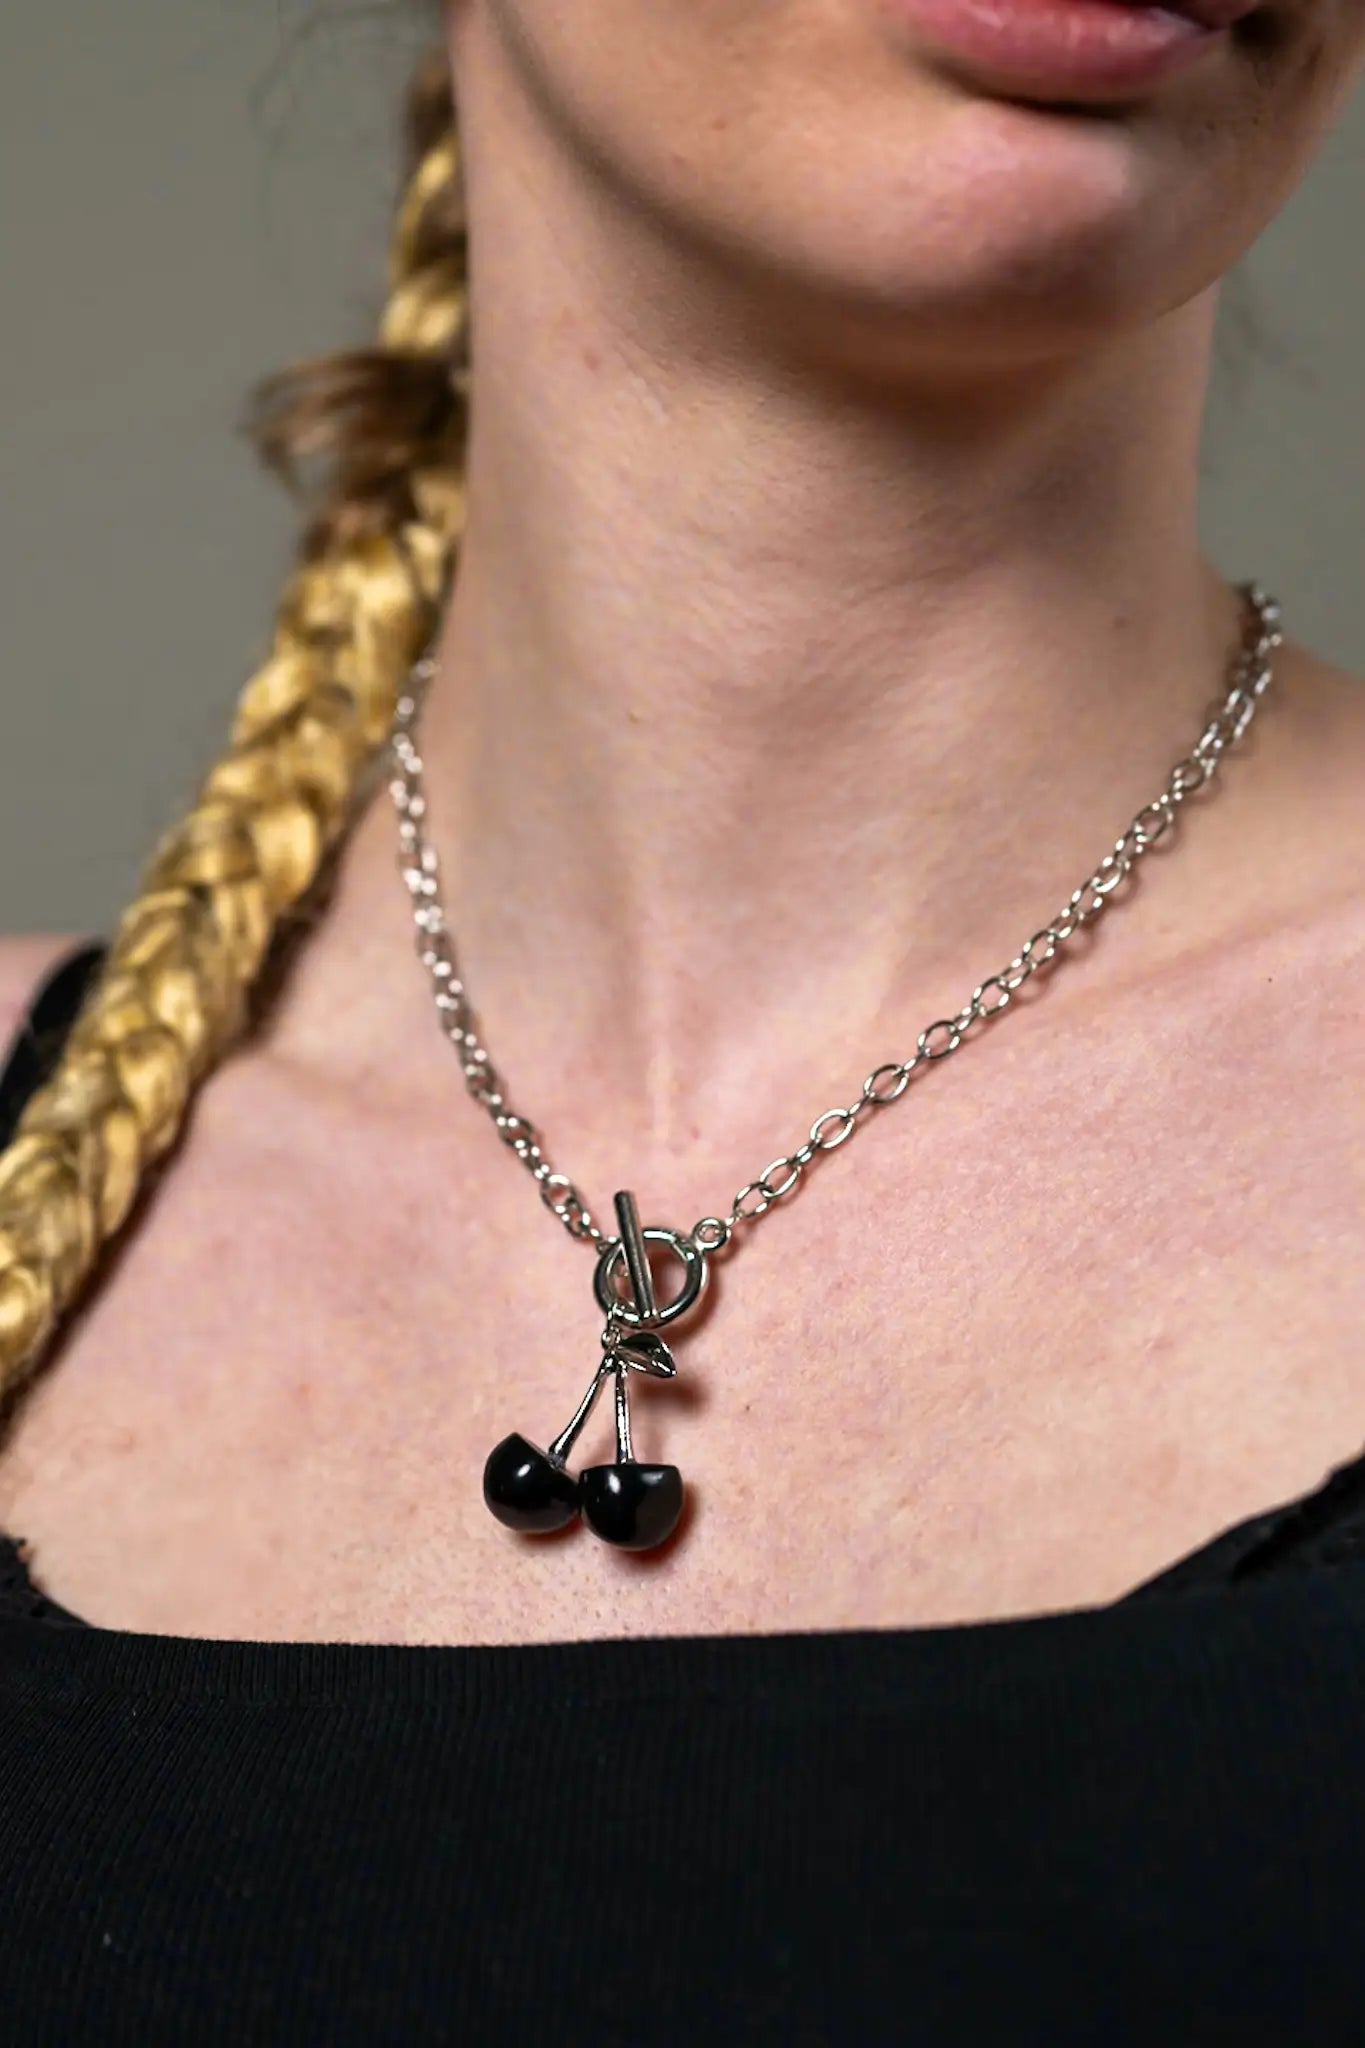 Cherry on Top: Necklace